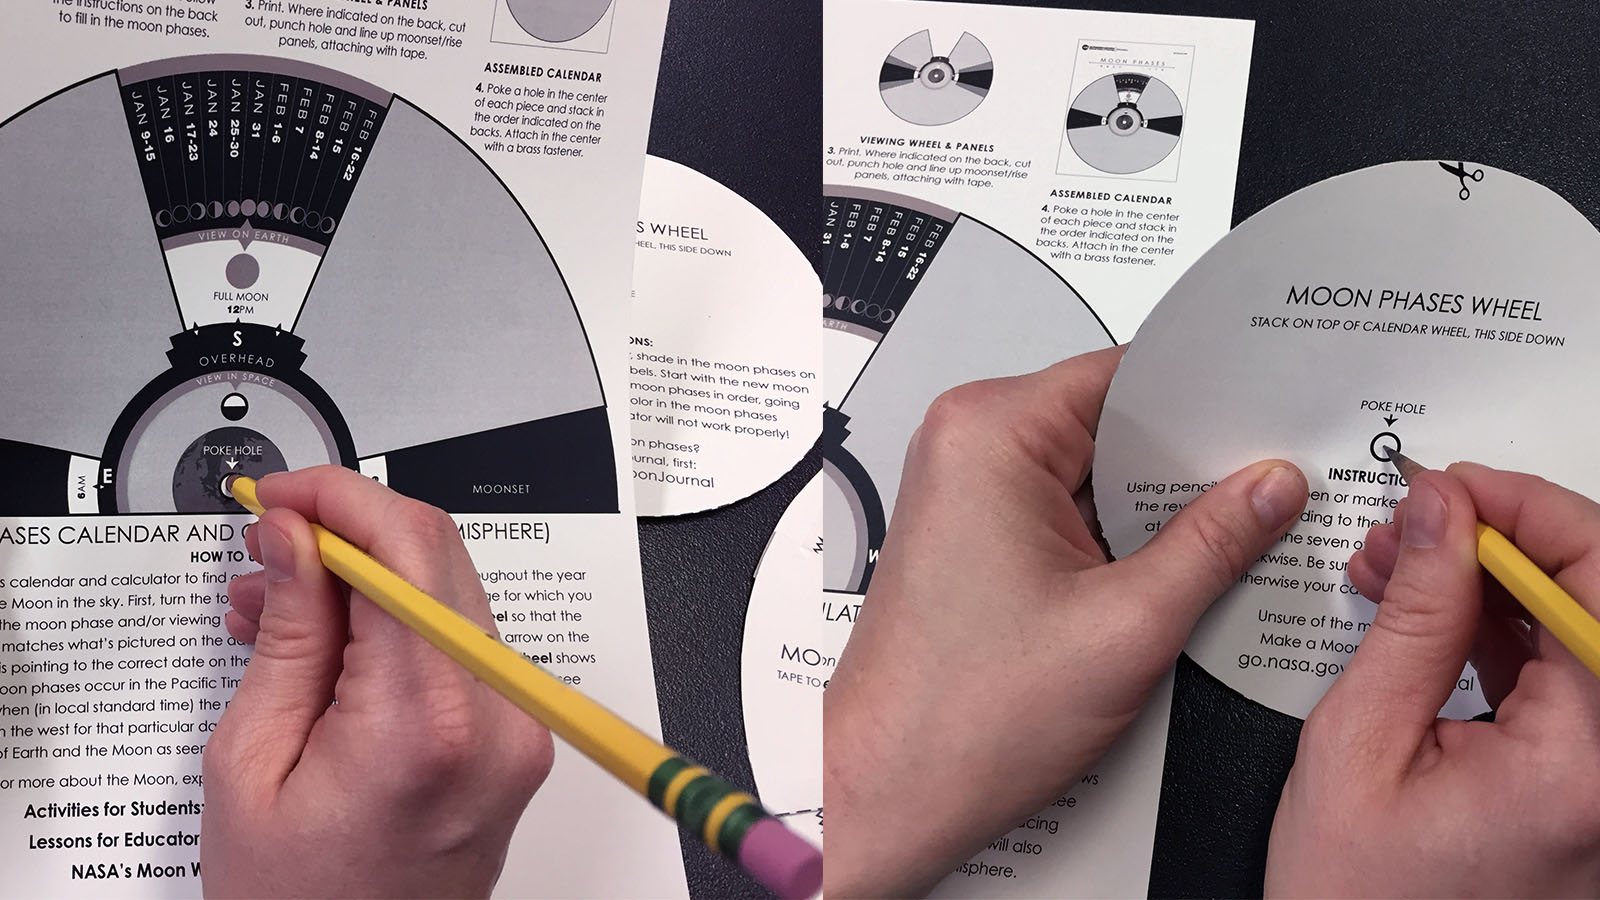 Educator Guide: Make a Moon Phases Calendar and Calculator - New